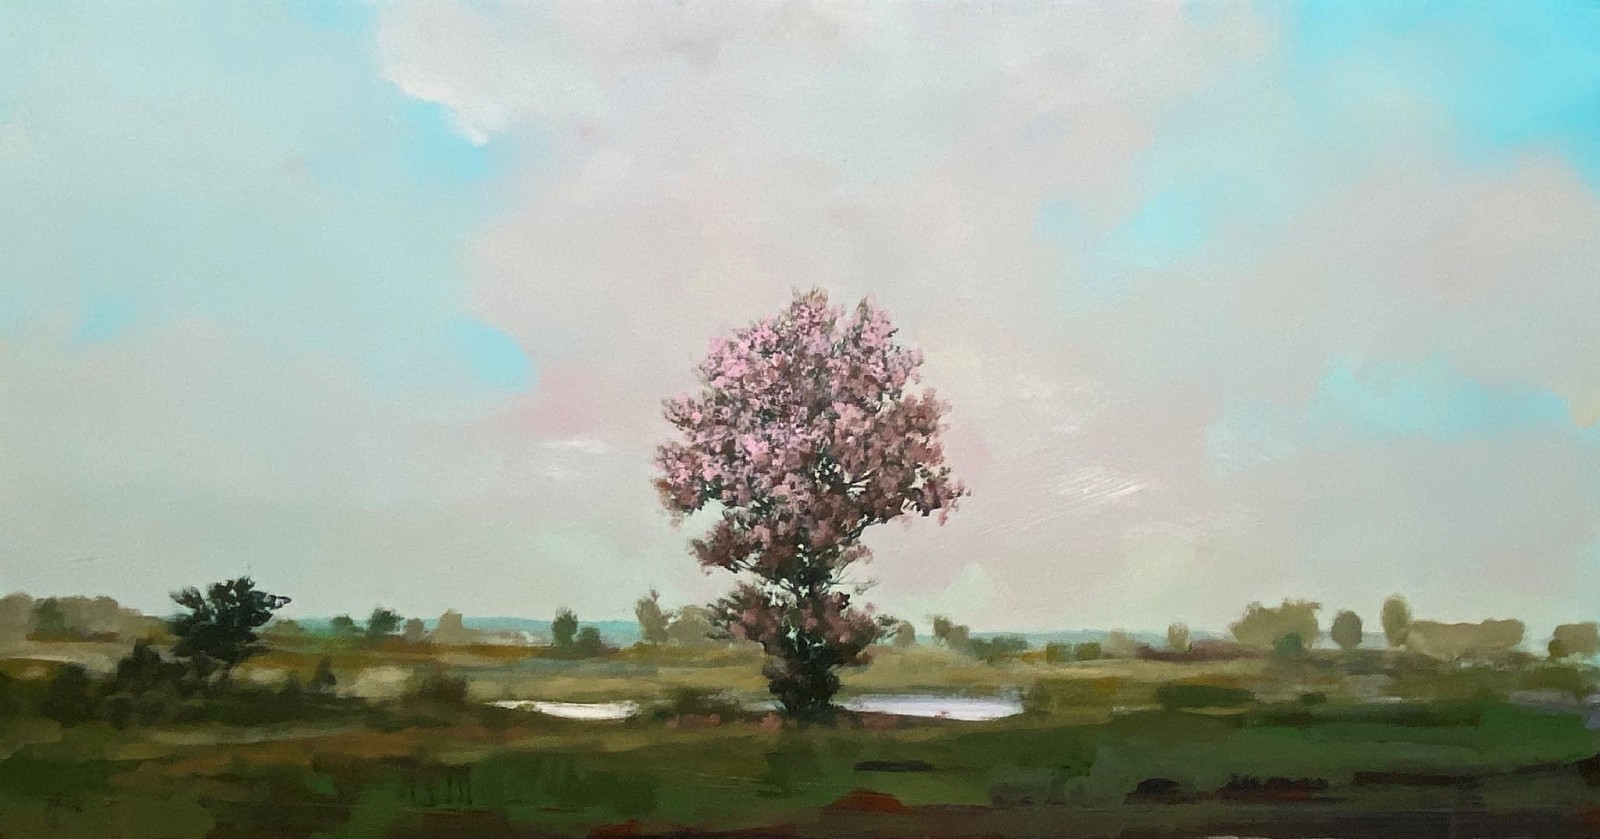 Peter Hoffer, Rose Tree
Acrylic and Epoxy on Board, 25 x 48 in. (63.5 x 121.9 cm)
SOLD
07876
&bull;